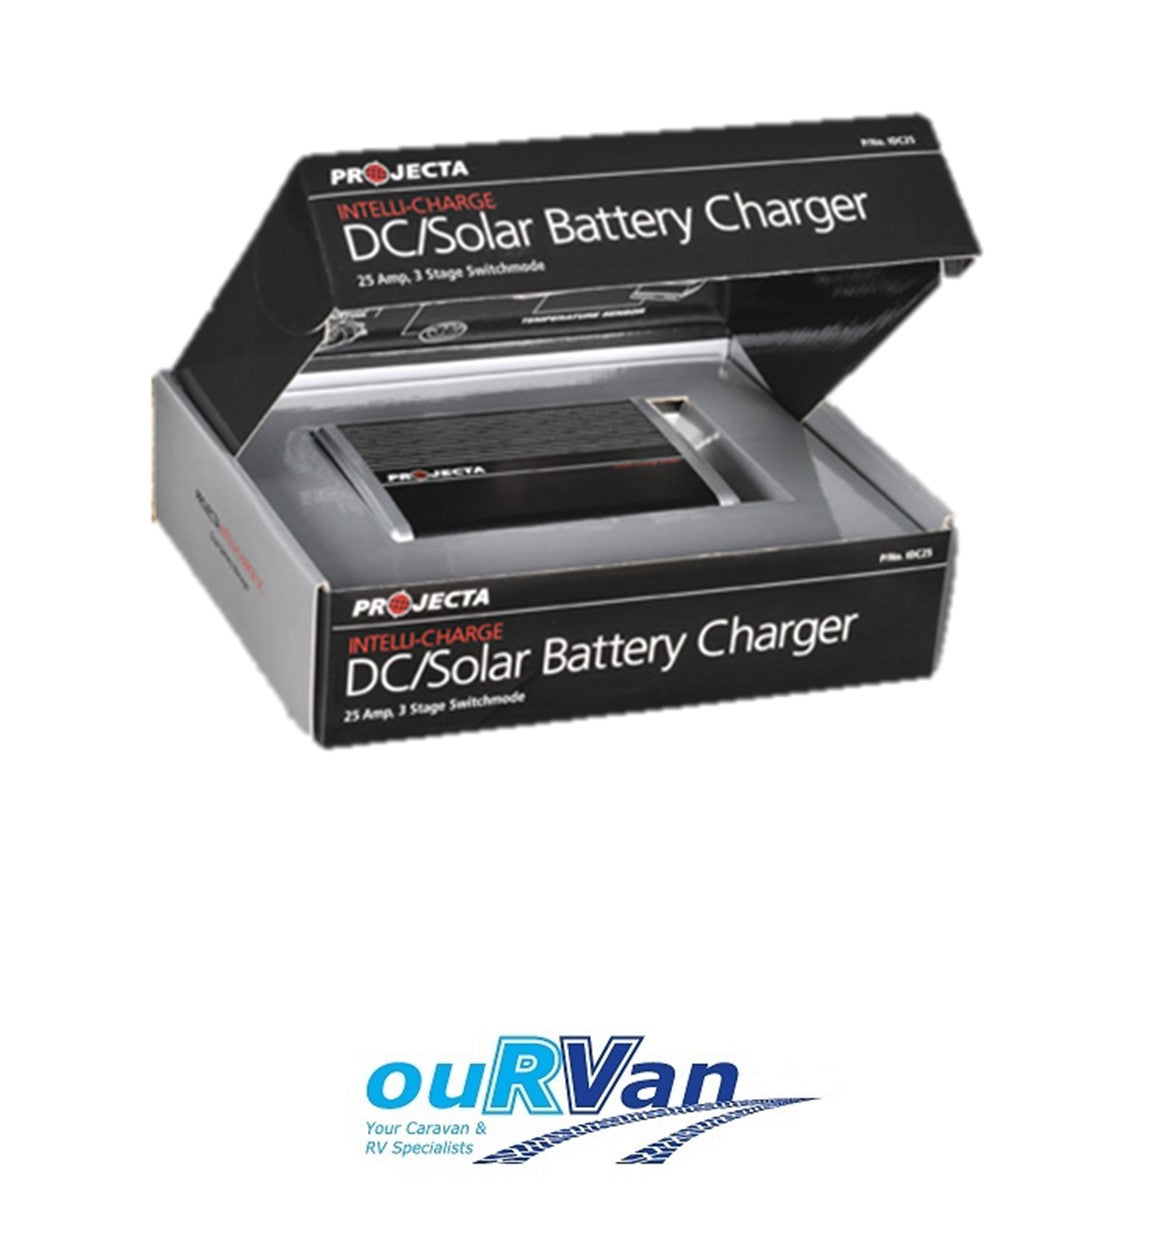 IDC25 DC to DC Charger